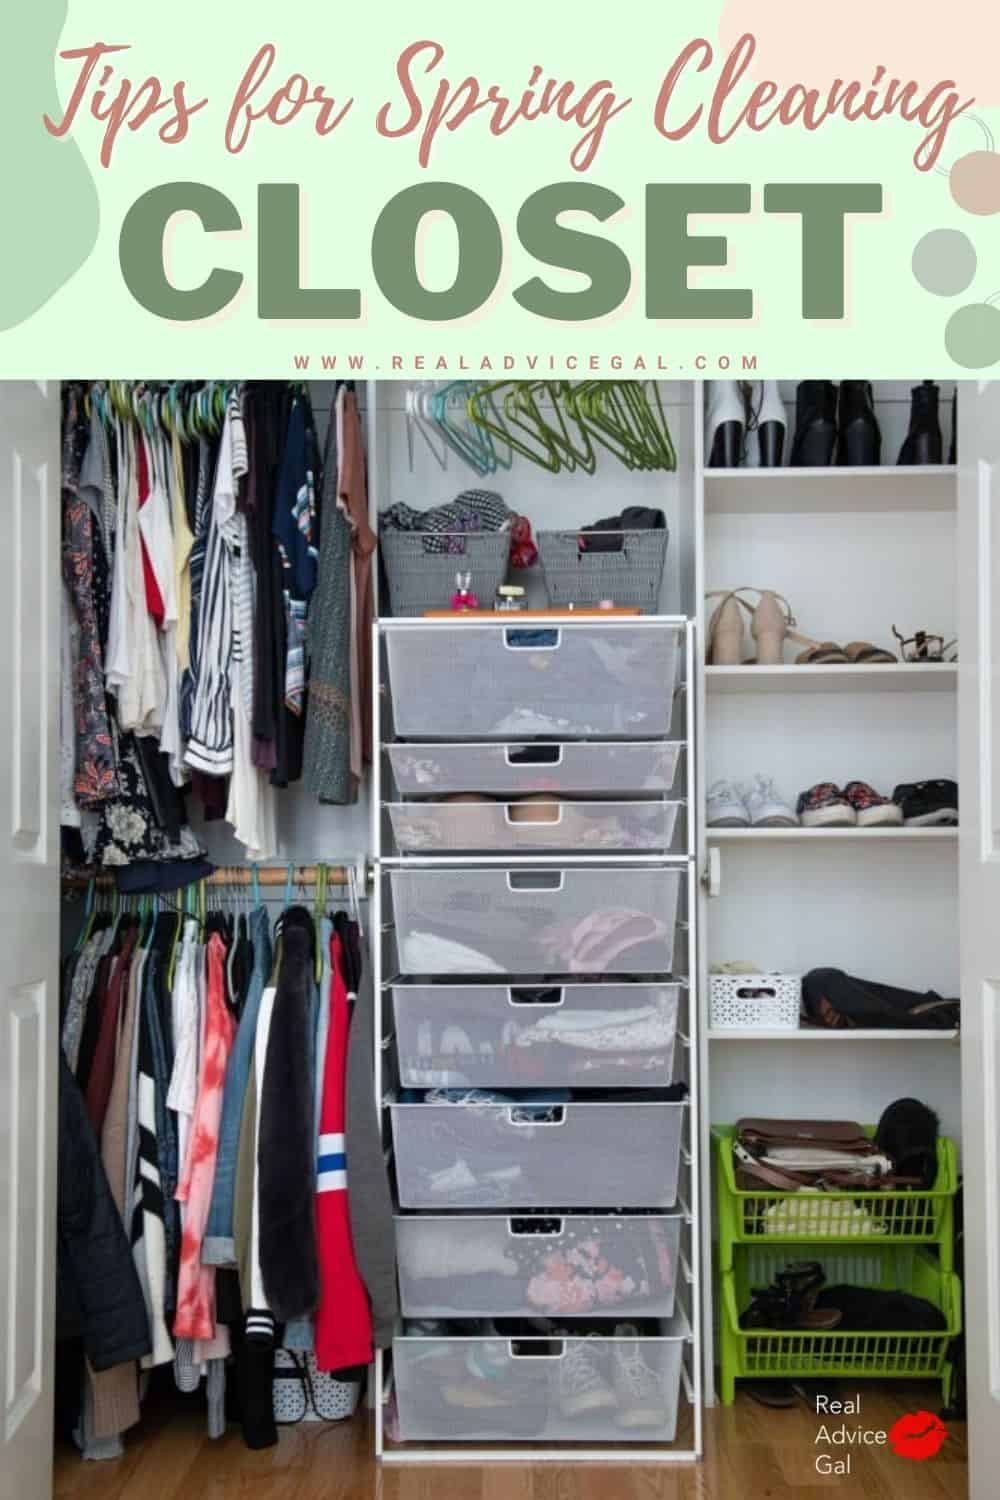 Closet spring cleaning tips